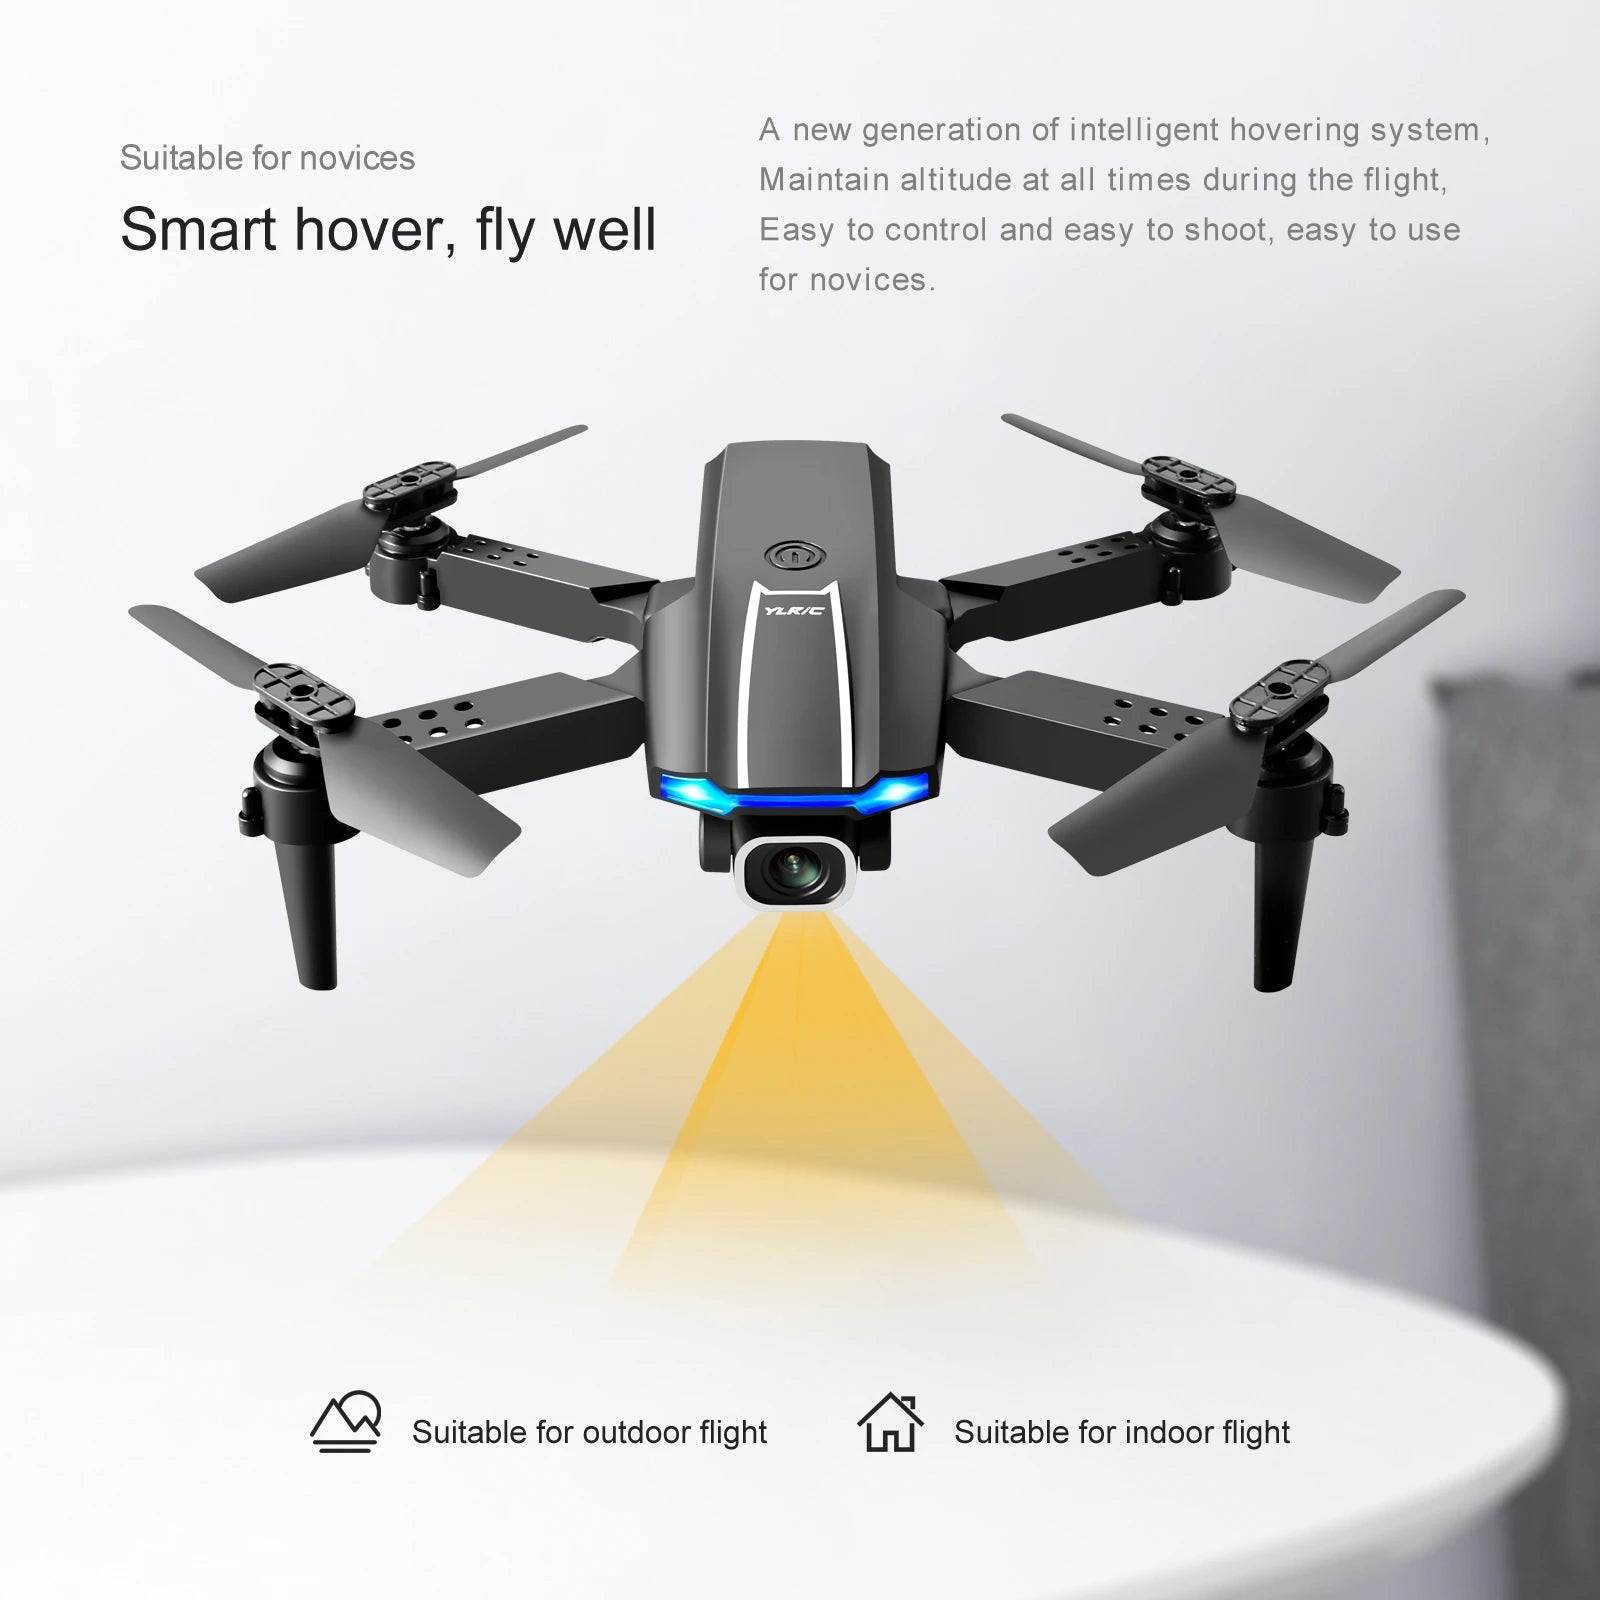 KBDFA S65 4K Mini Drone, intelligent hovering system suitable for novices maintain altitude at all times